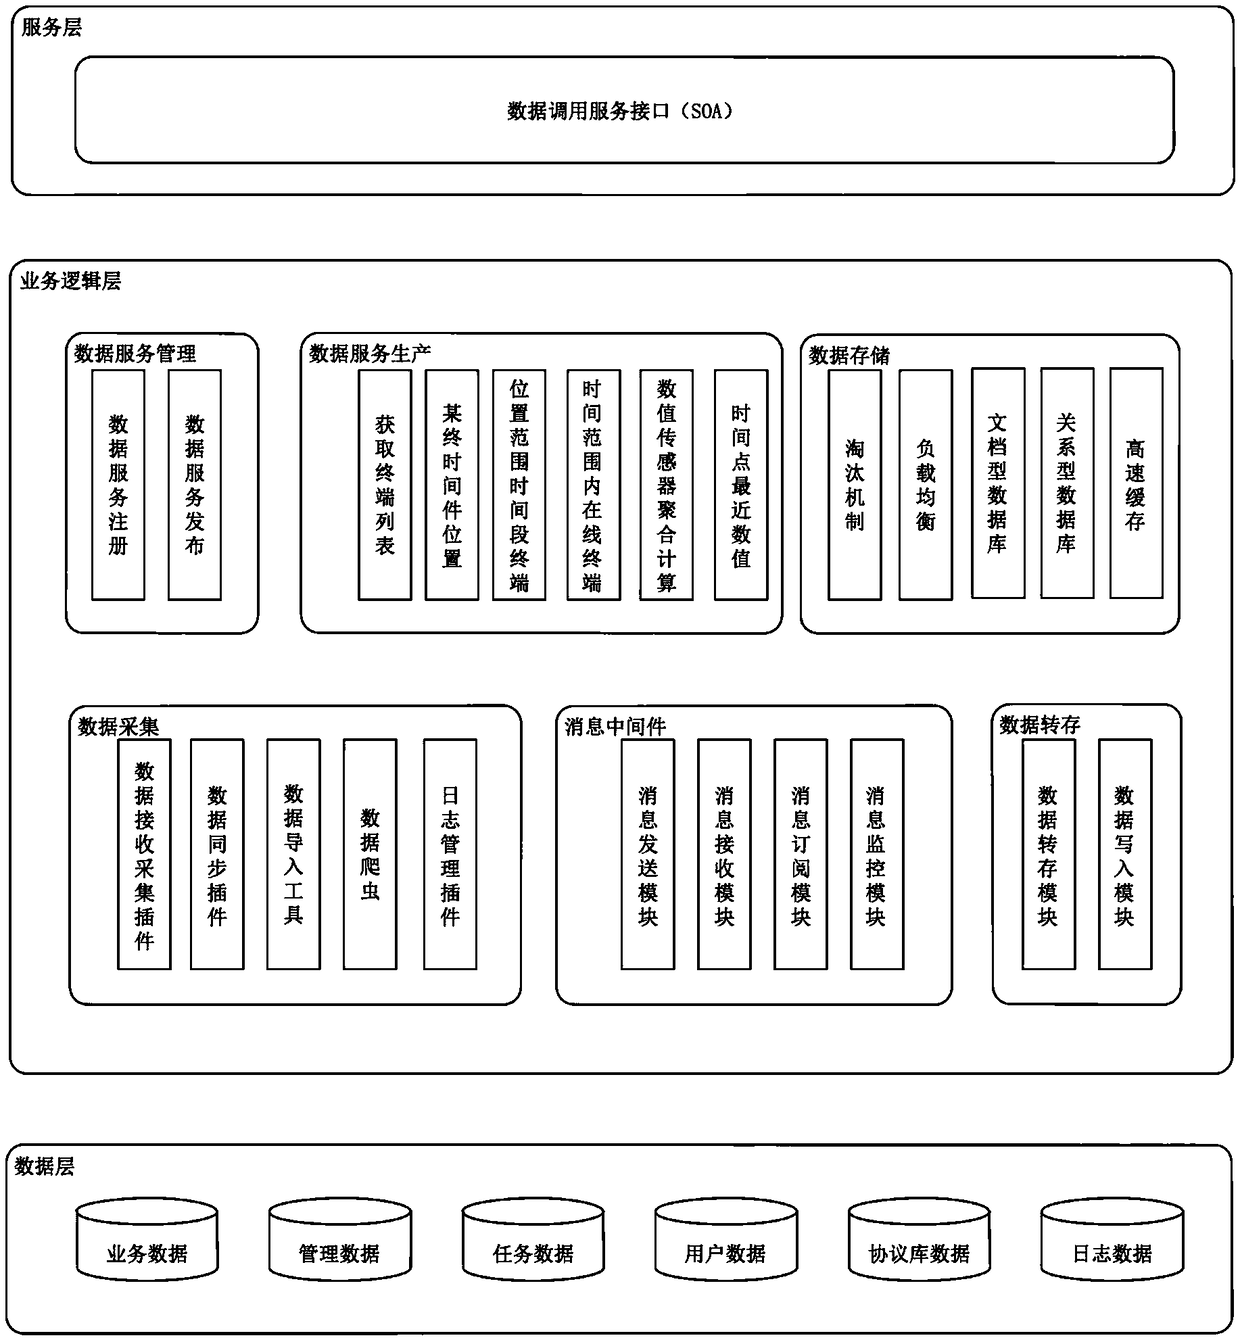 System suitable for mass short message data processing of a data center